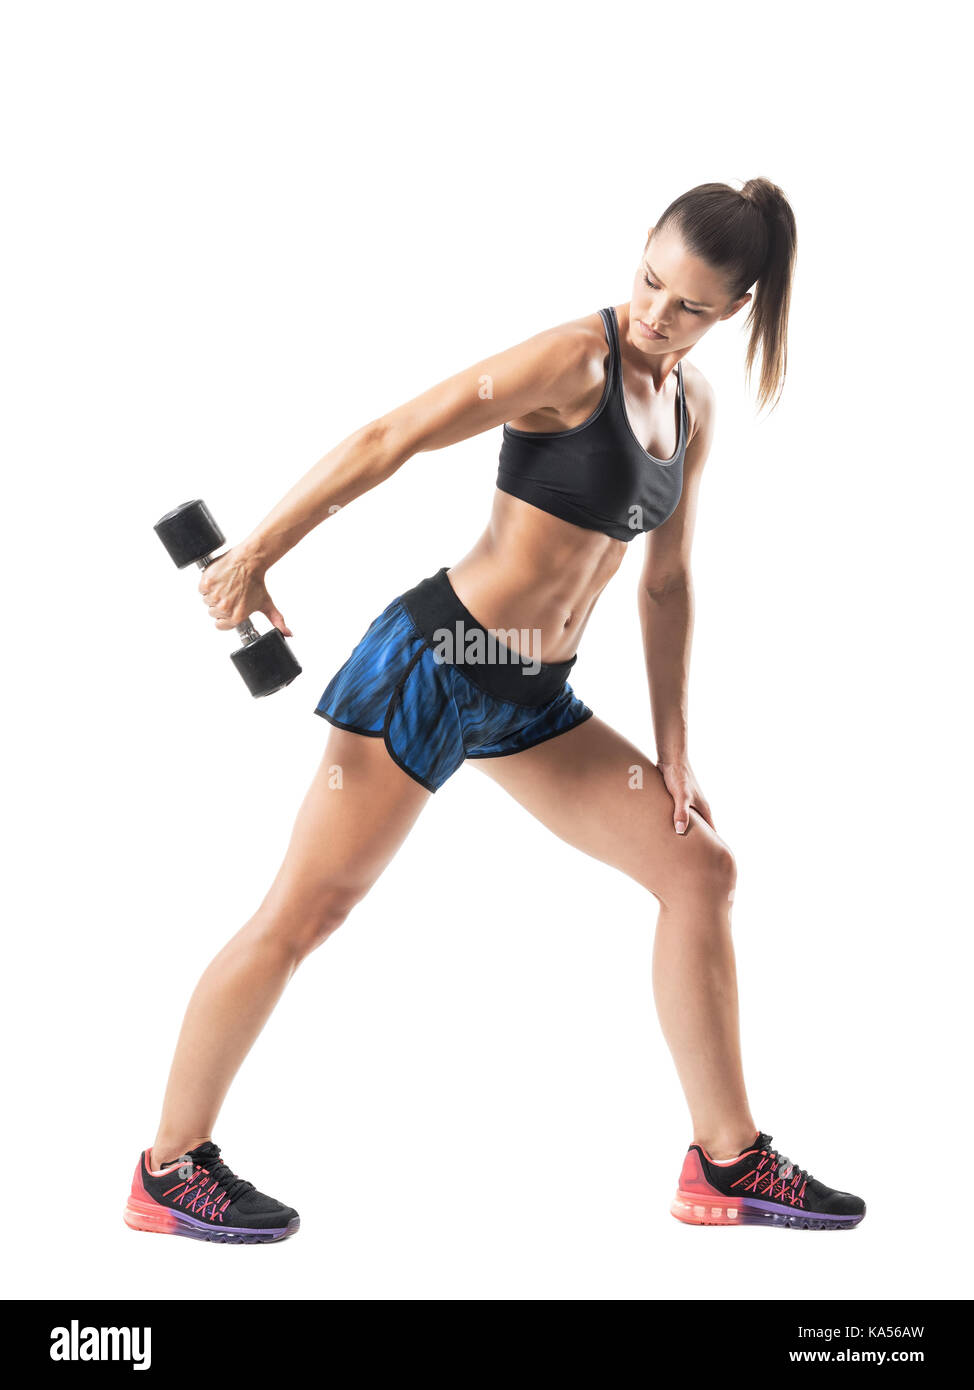 Premium Photo  Athletic young woman doing triceps exercises on a